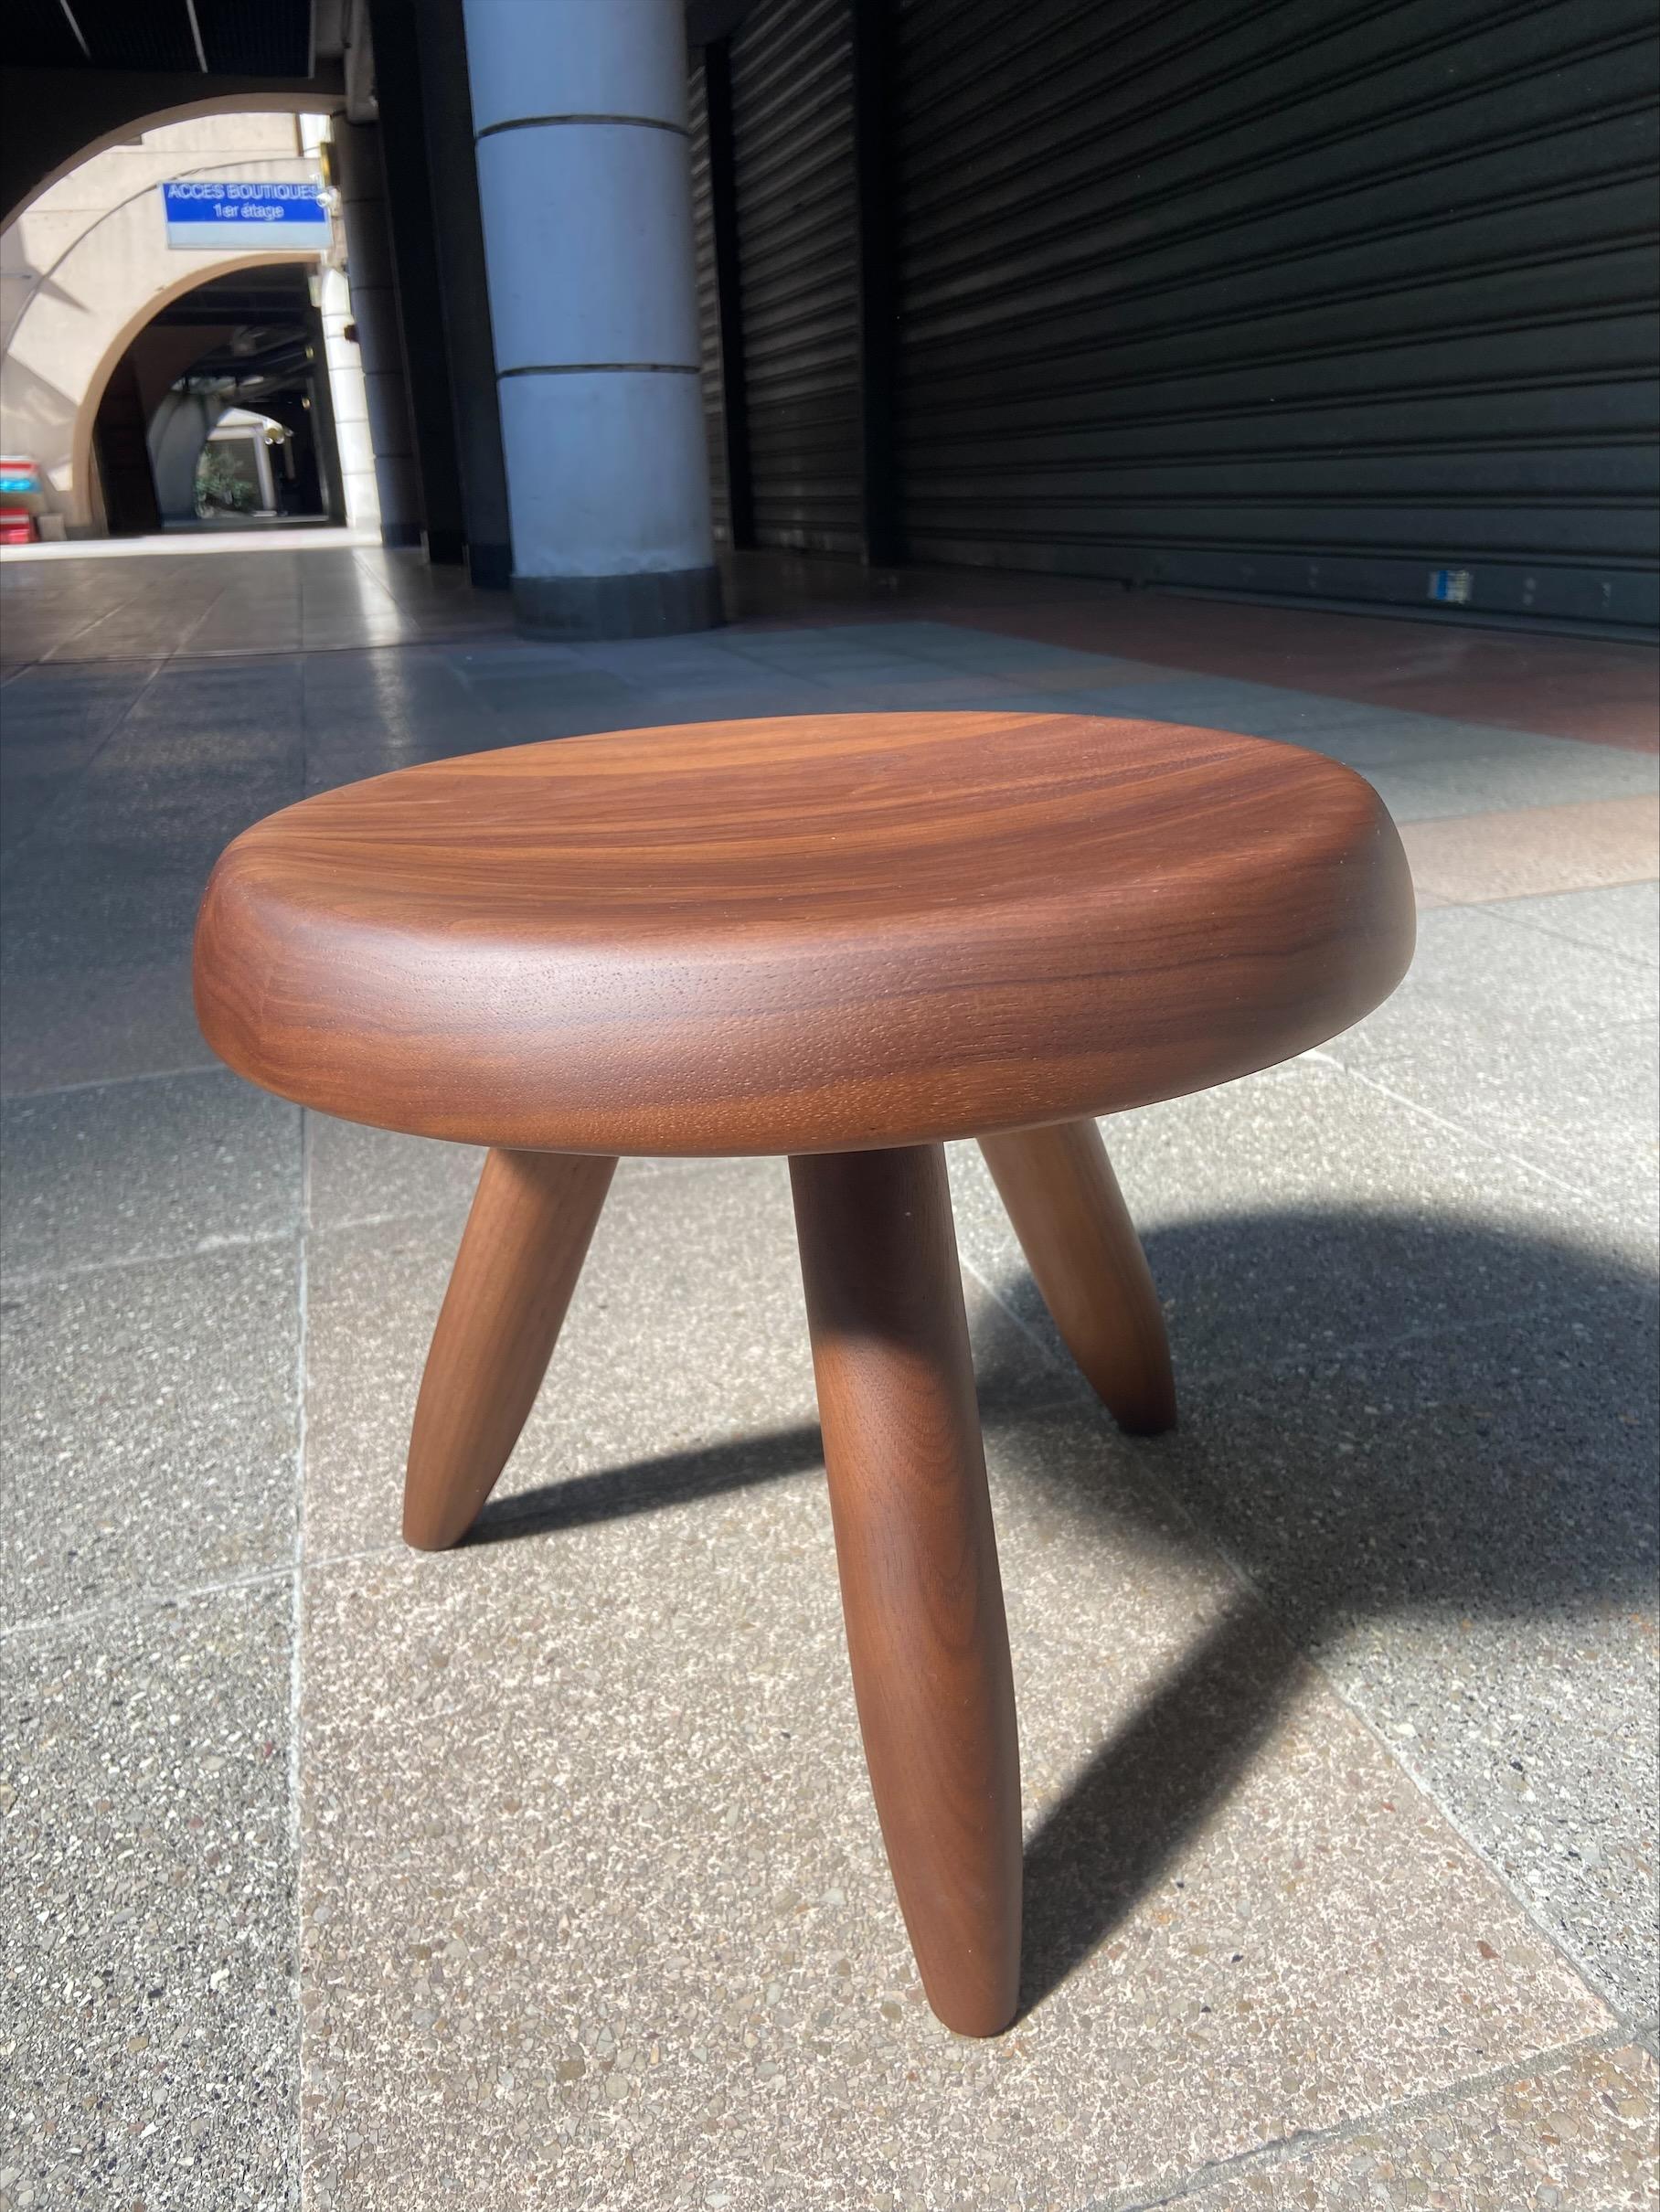 Low shepherd stool - Charlotte Perriand
Walnut
Numbered and signed
With Cassina certificate
New - Cassina edition
Measures: D 33 cms x H 26,7 cms.